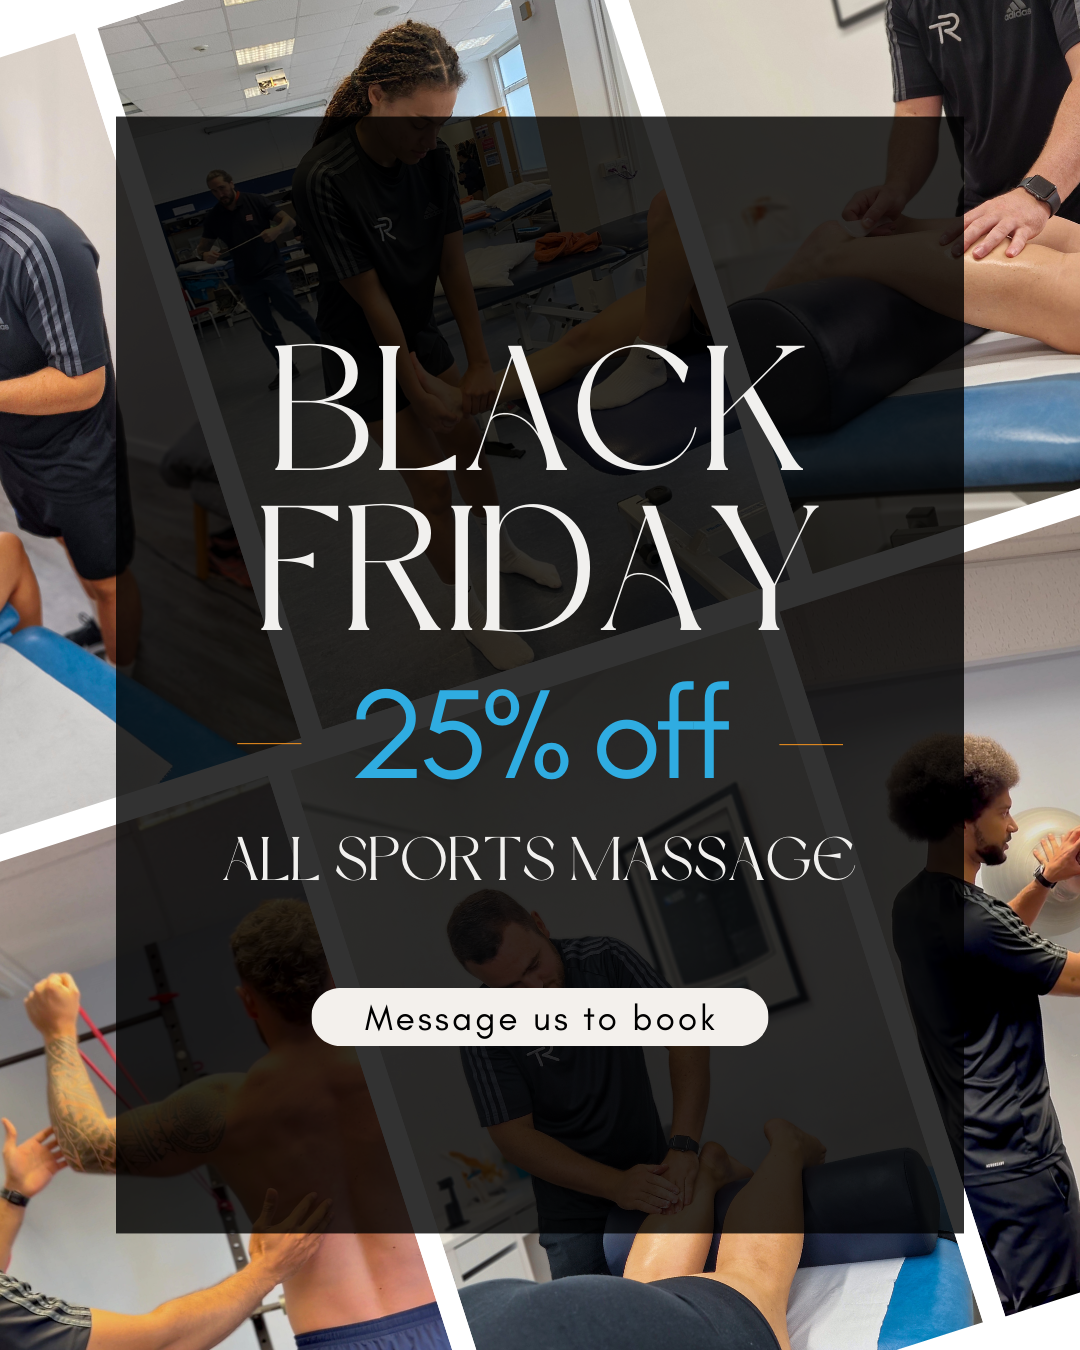 Black Friday Deal for sports massage and physiotherapy